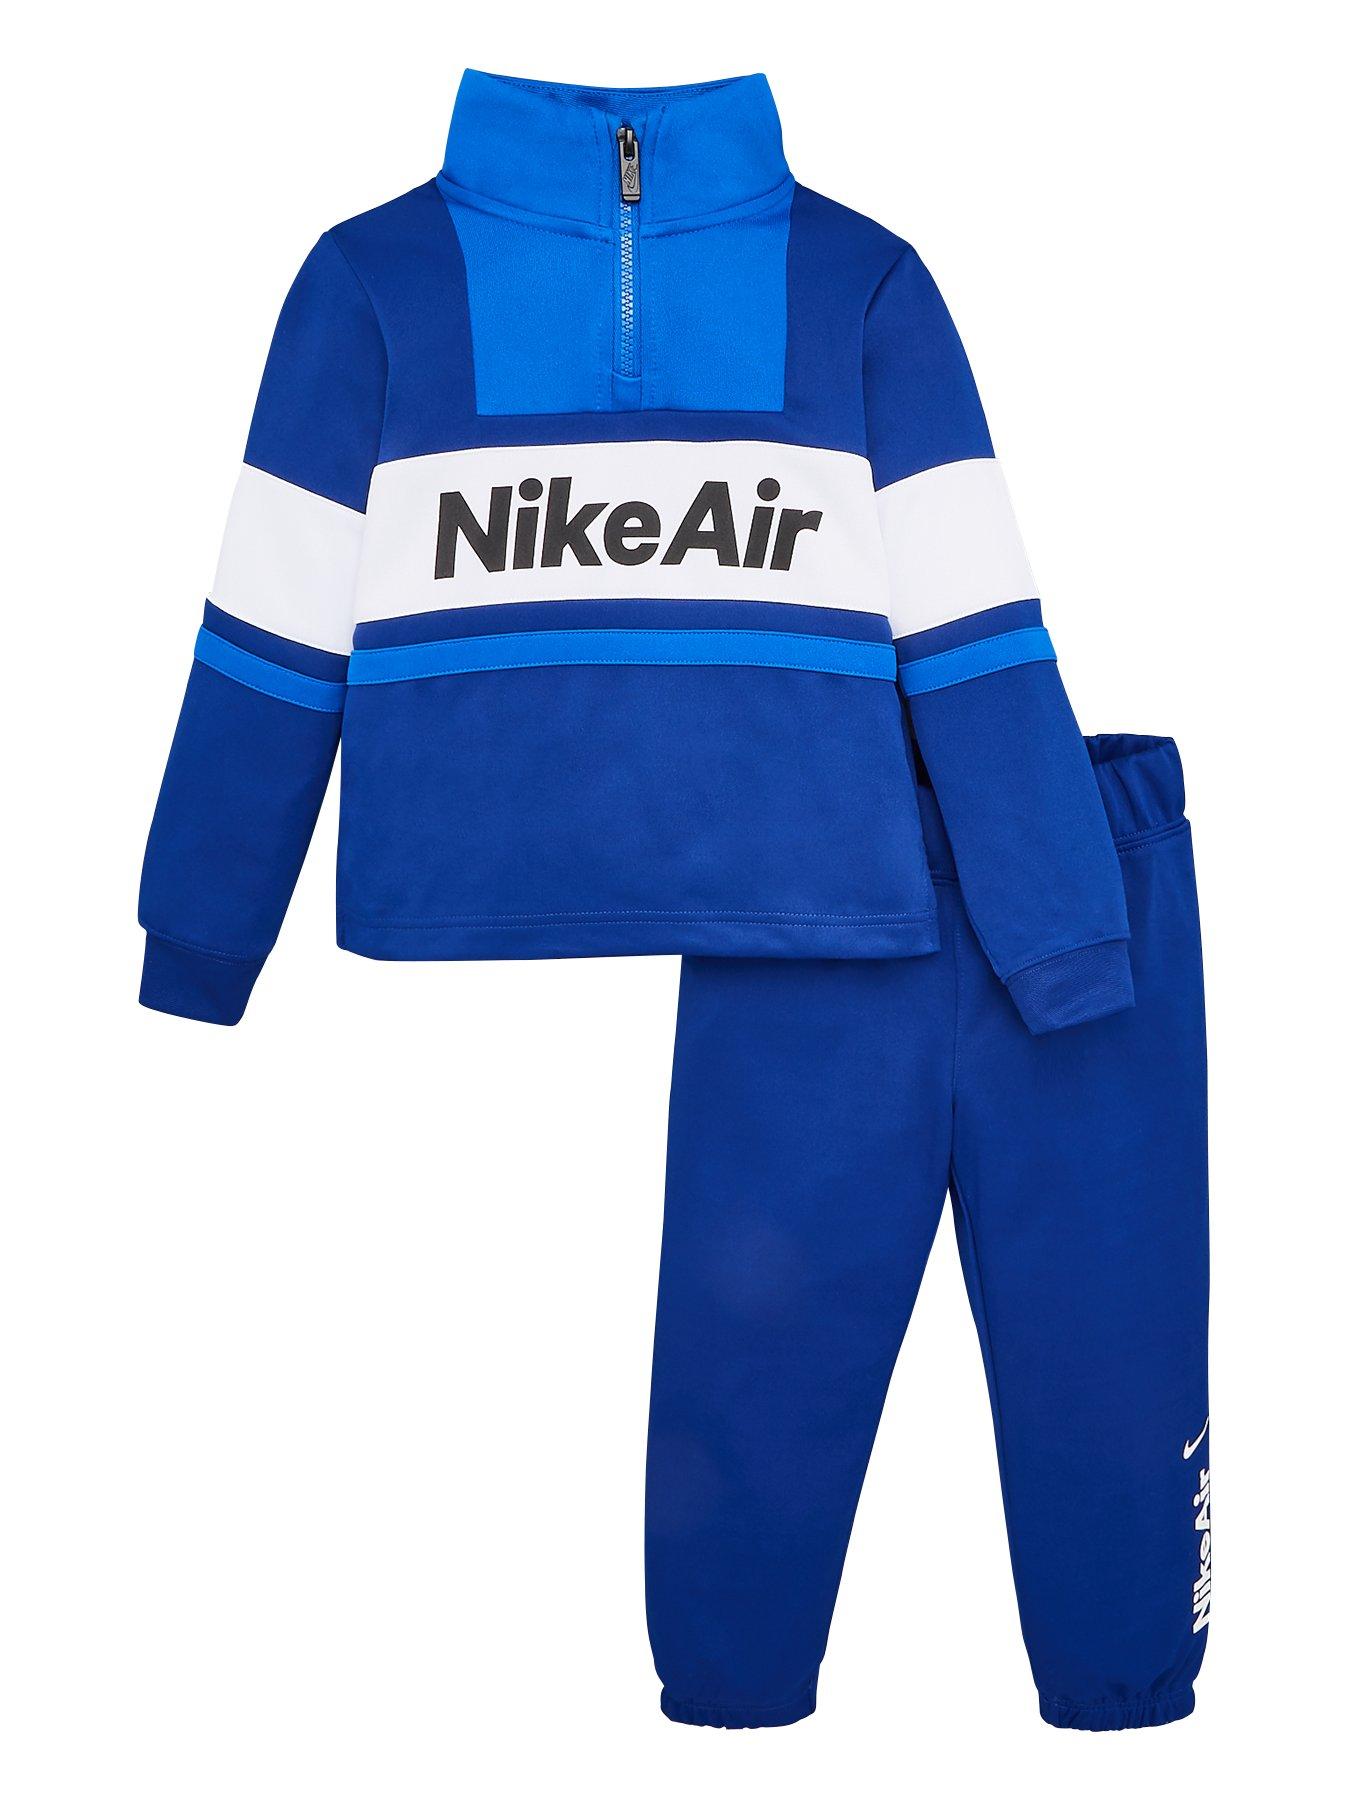 nike clothes for 1 year old boy